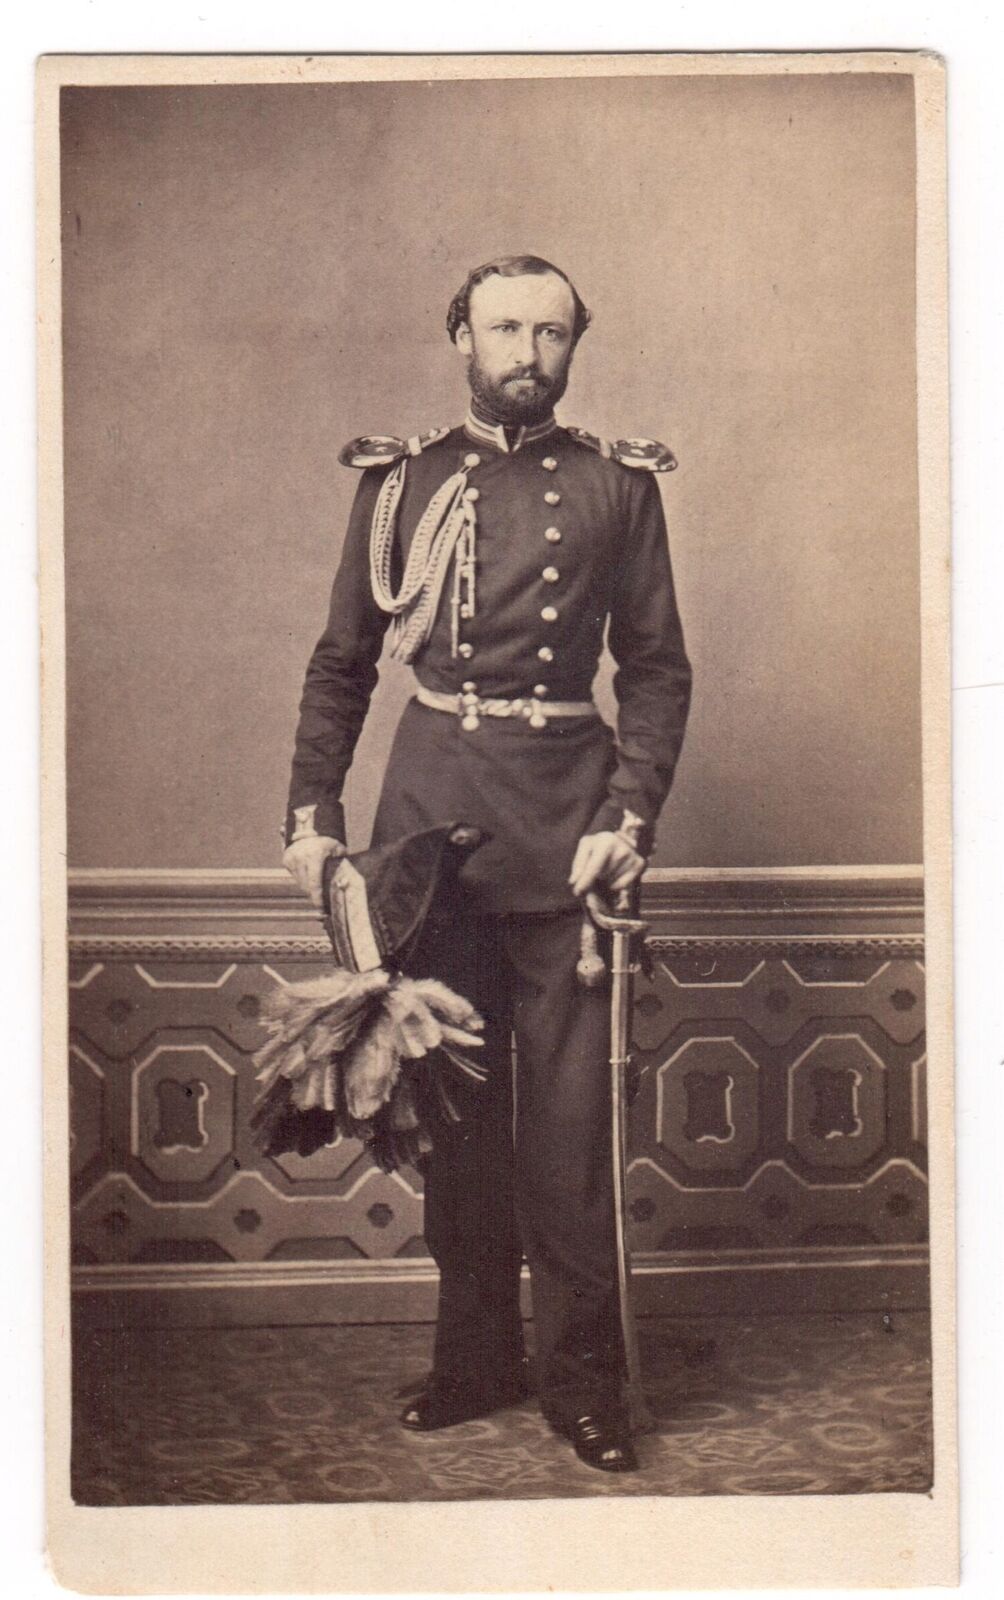 Antique CDV Photo - Portrait of a Soldier with Awards - 19th Century - Sweden